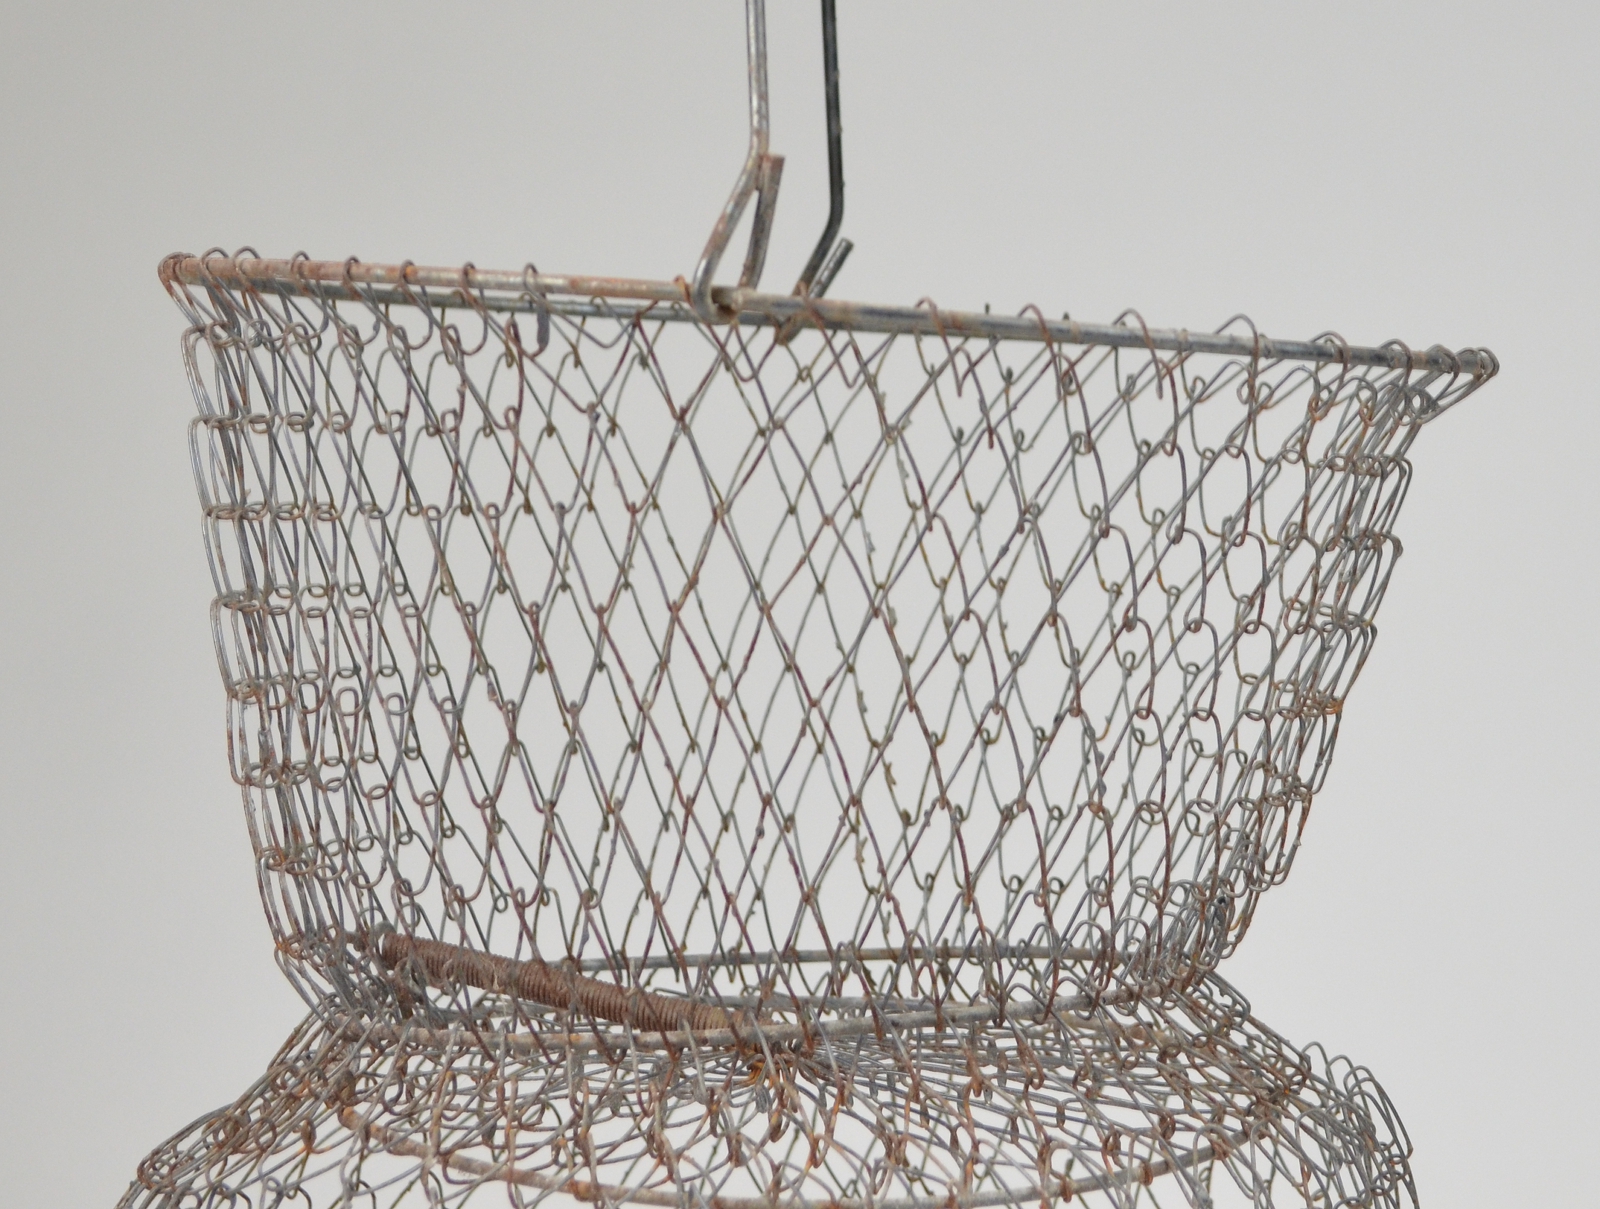 Vintage Metal Live Fish Basket With Handle & 2 Spring Trap Doors - 15.75  Tall